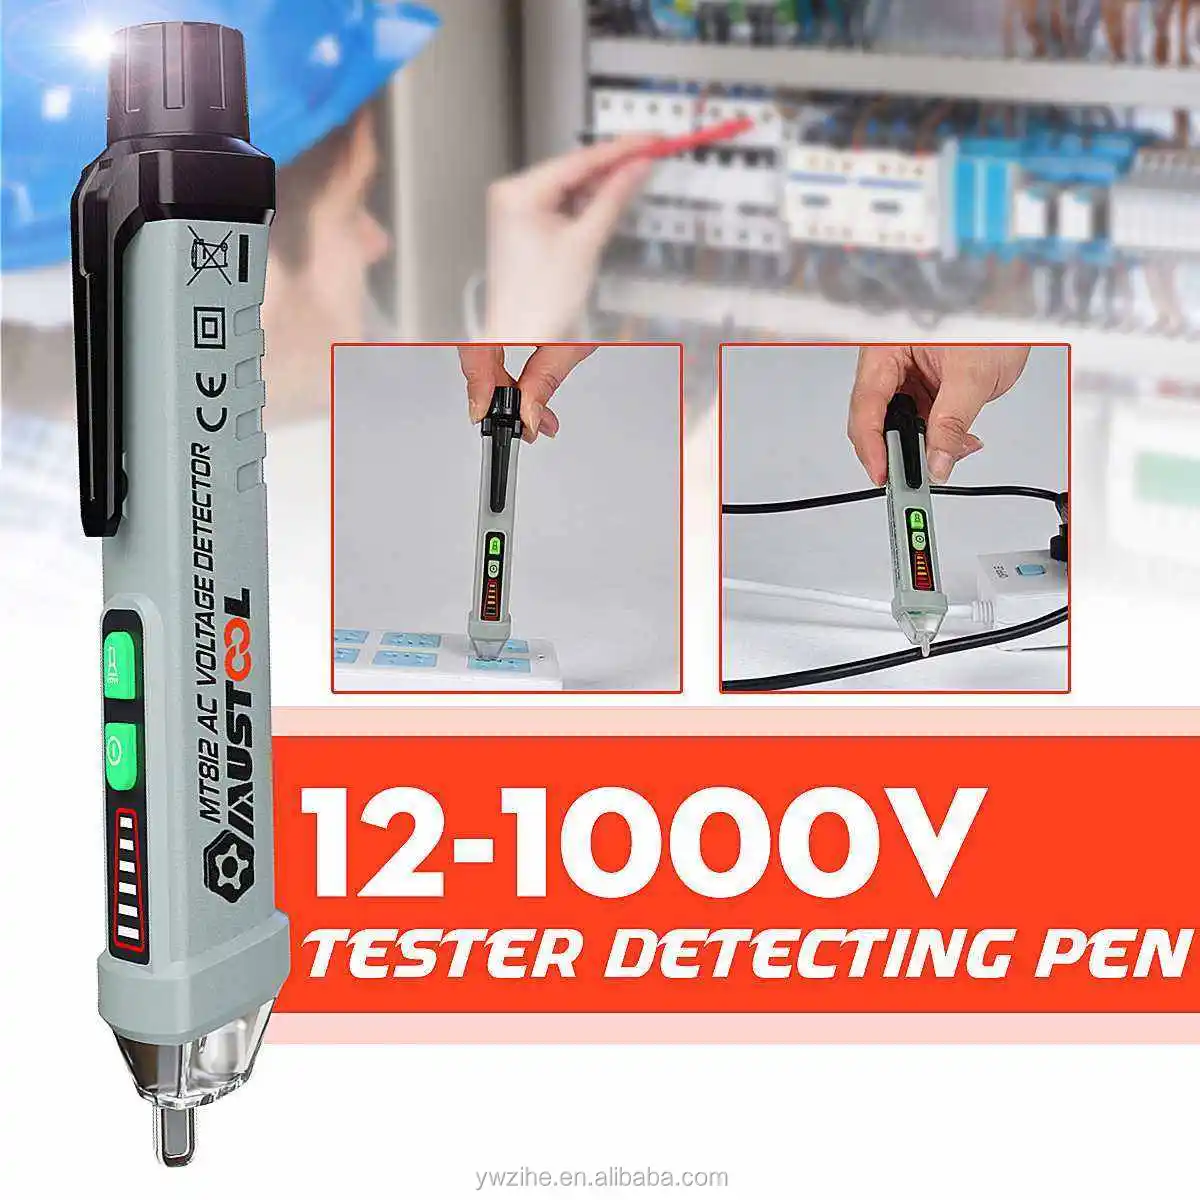 Shortcuts Viva The city Mustool Mt812 Multifunctional Ac 12-1000v Non Contact Voltage Tester Pen  Lcd Alarm Self-testing Tester Detector Voltage Meters - Buy Non-contact  Voltage Tester Pen,Lcd Alarm Self-testing Tester,Non-contact Electric Pen  Product on Alibaba.com